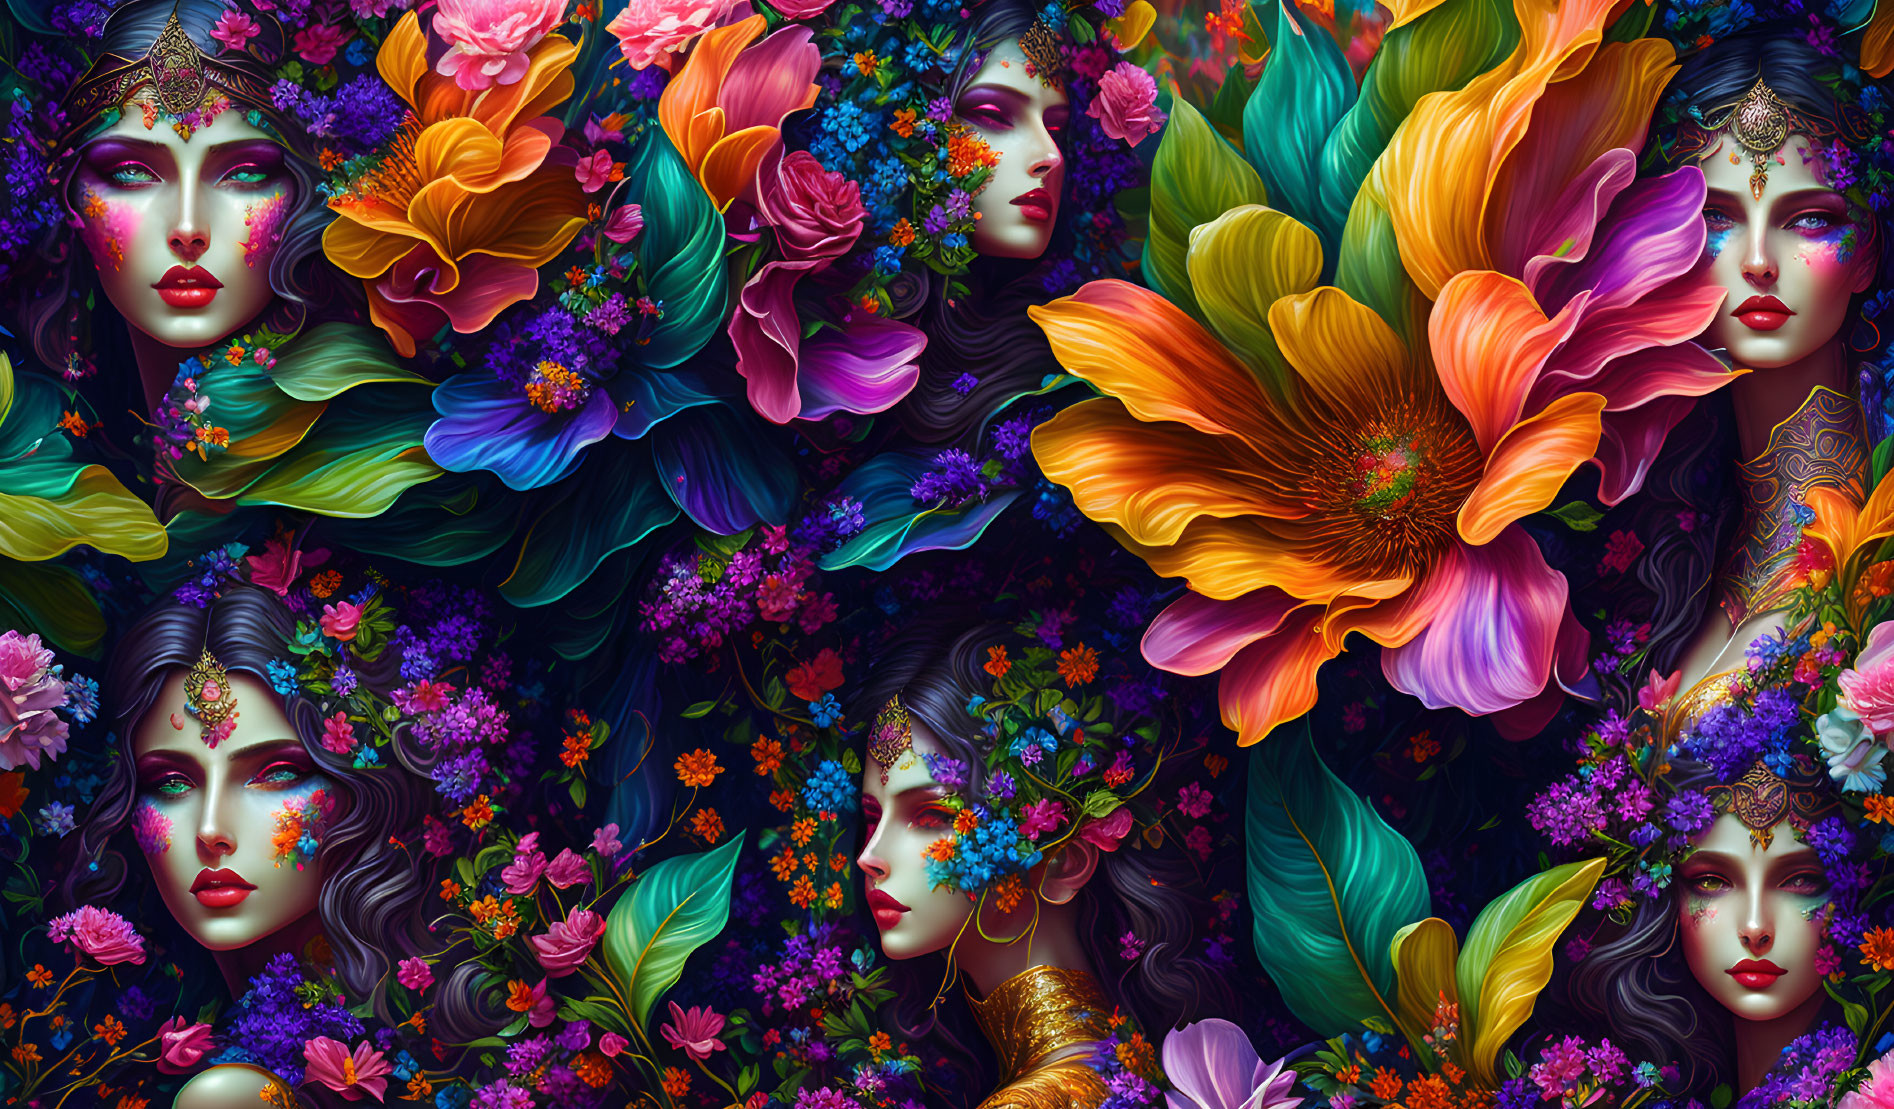 Digital Art: Ethereal Female Figures with Floral Elements